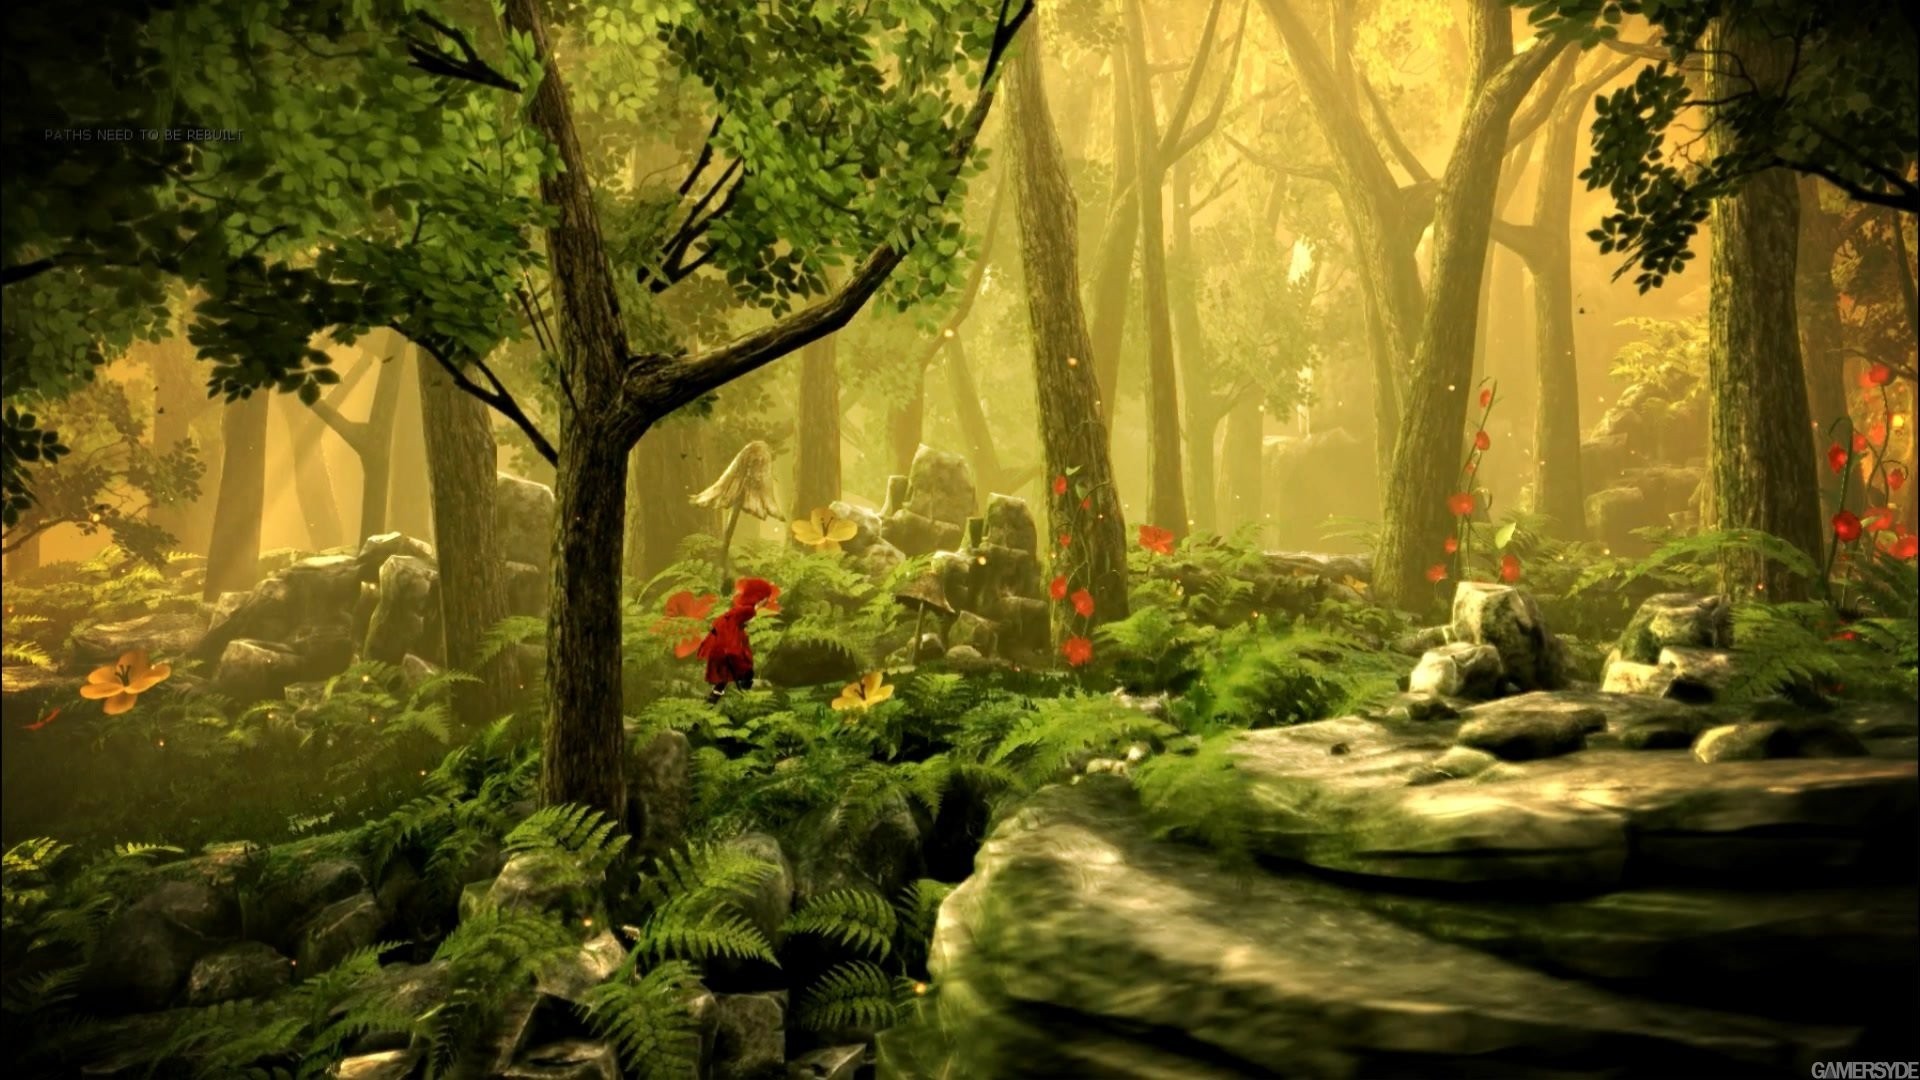 Fairytale Forest Full Photo - Fantasy Fairy Tale Background - HD Wallpaper 